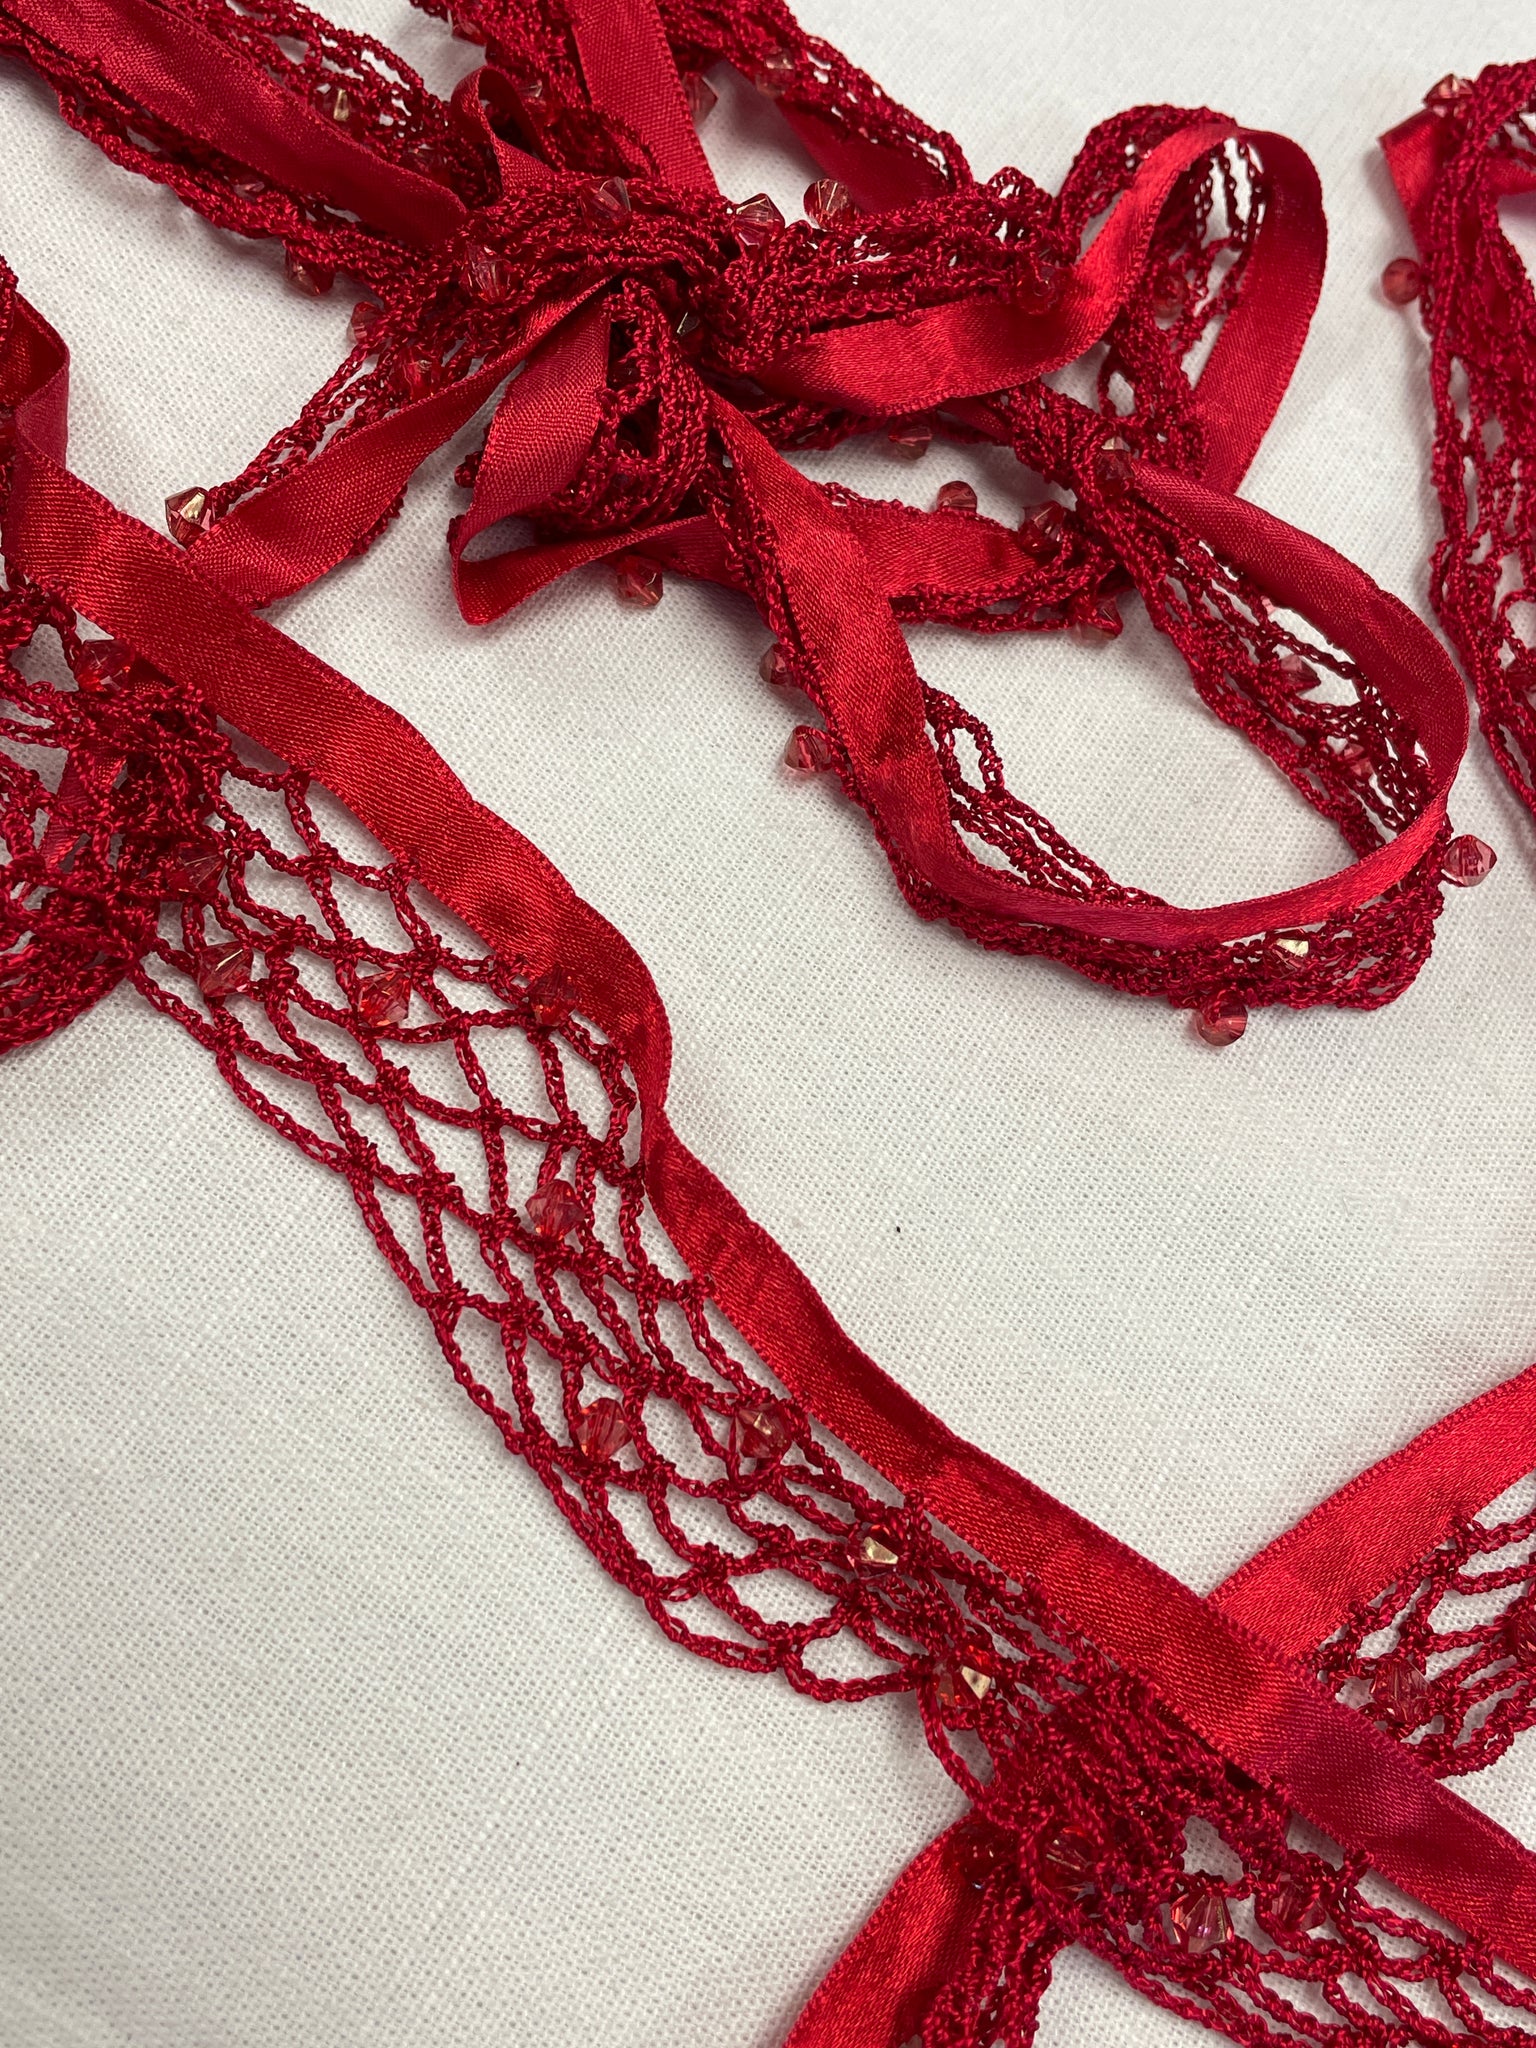 5 YD Polyester Net Trim with Faceted Beads - Red